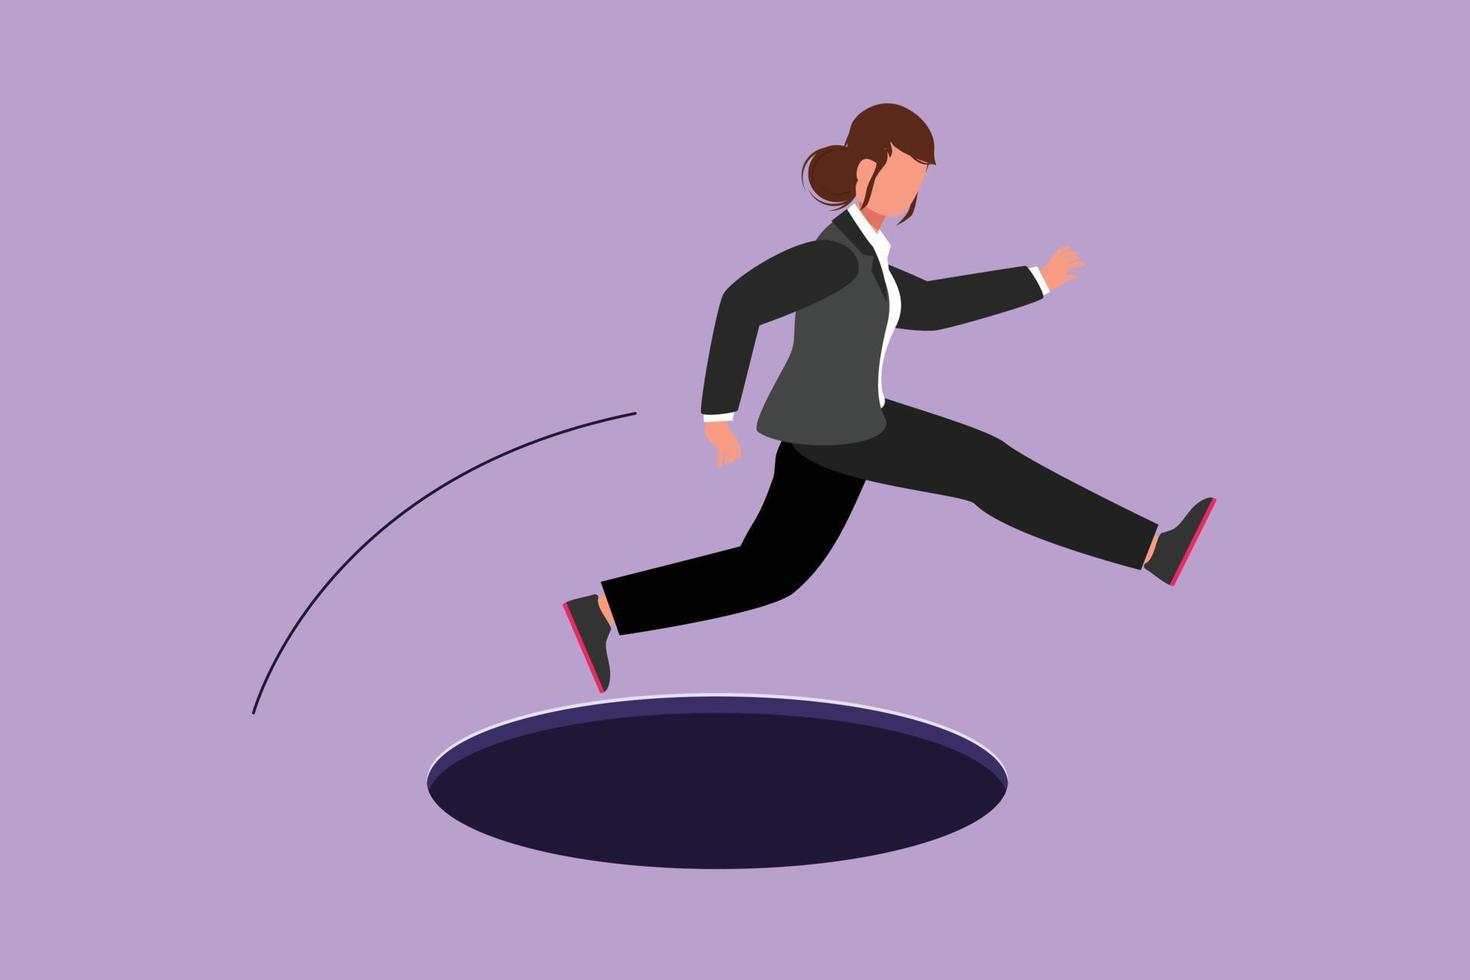 Graphic flat design drawing young businesswoman jumping through hole, metaphor to facing big problem. Business struggles in market competition. Strength for success. Cartoon style vector illustration